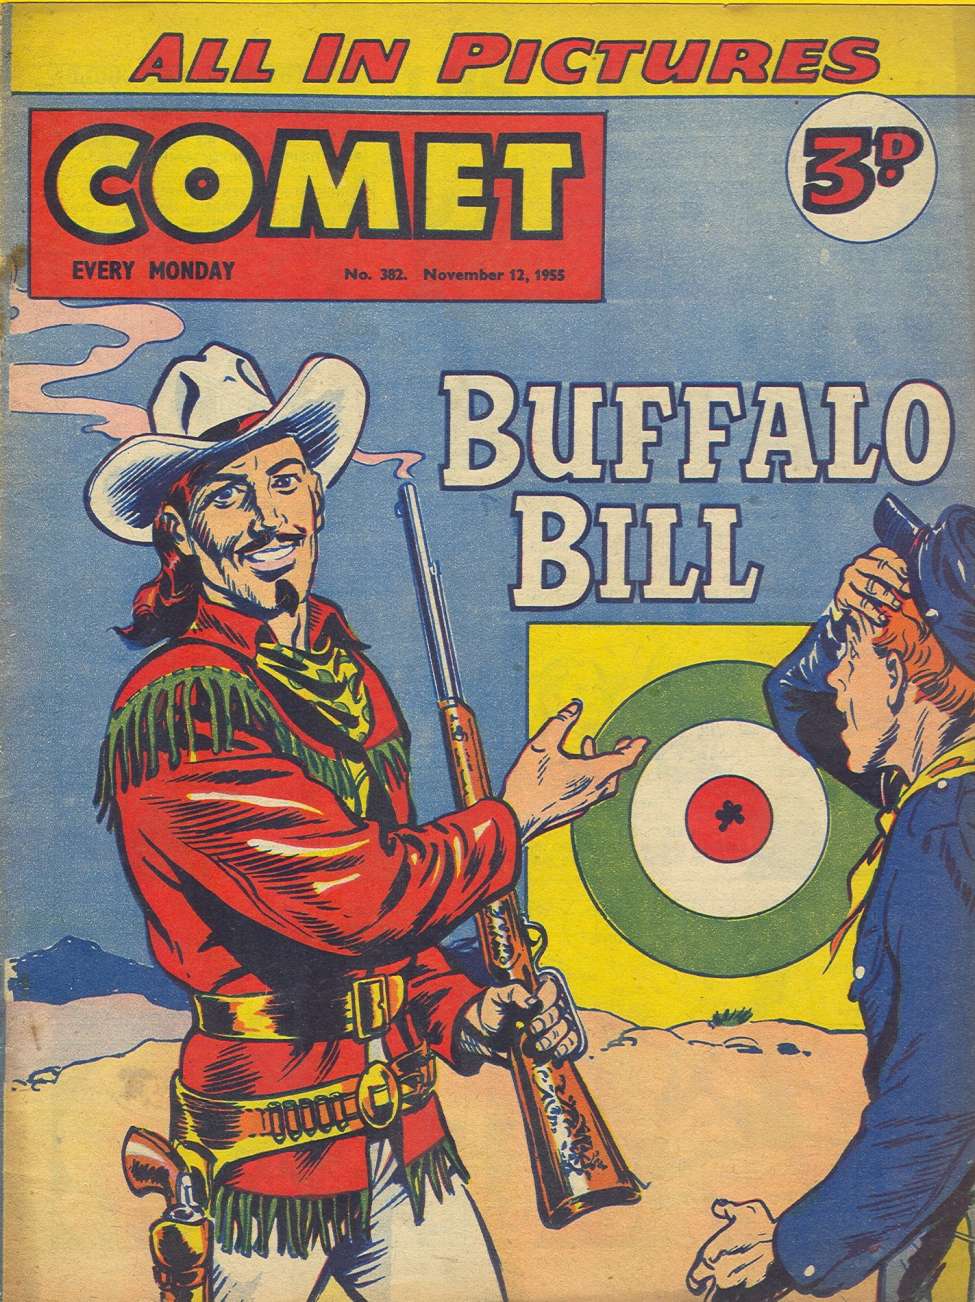 Book Cover For The Comet 382